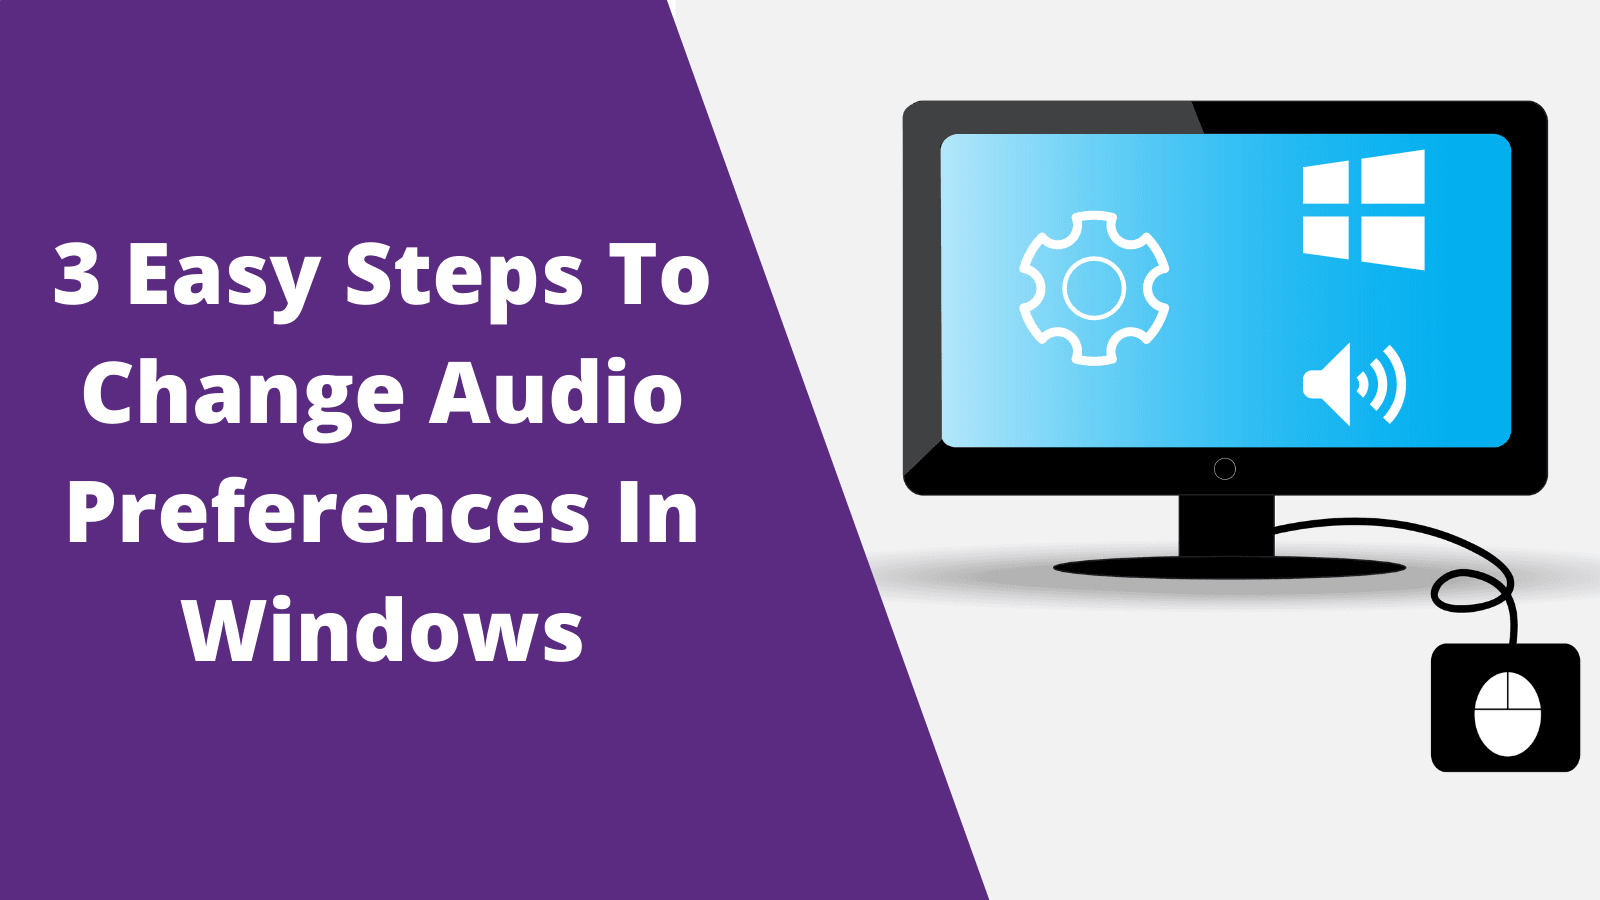 3 Easy Steps To Change Audio Preferences In Windows 10 - Headset Advisor